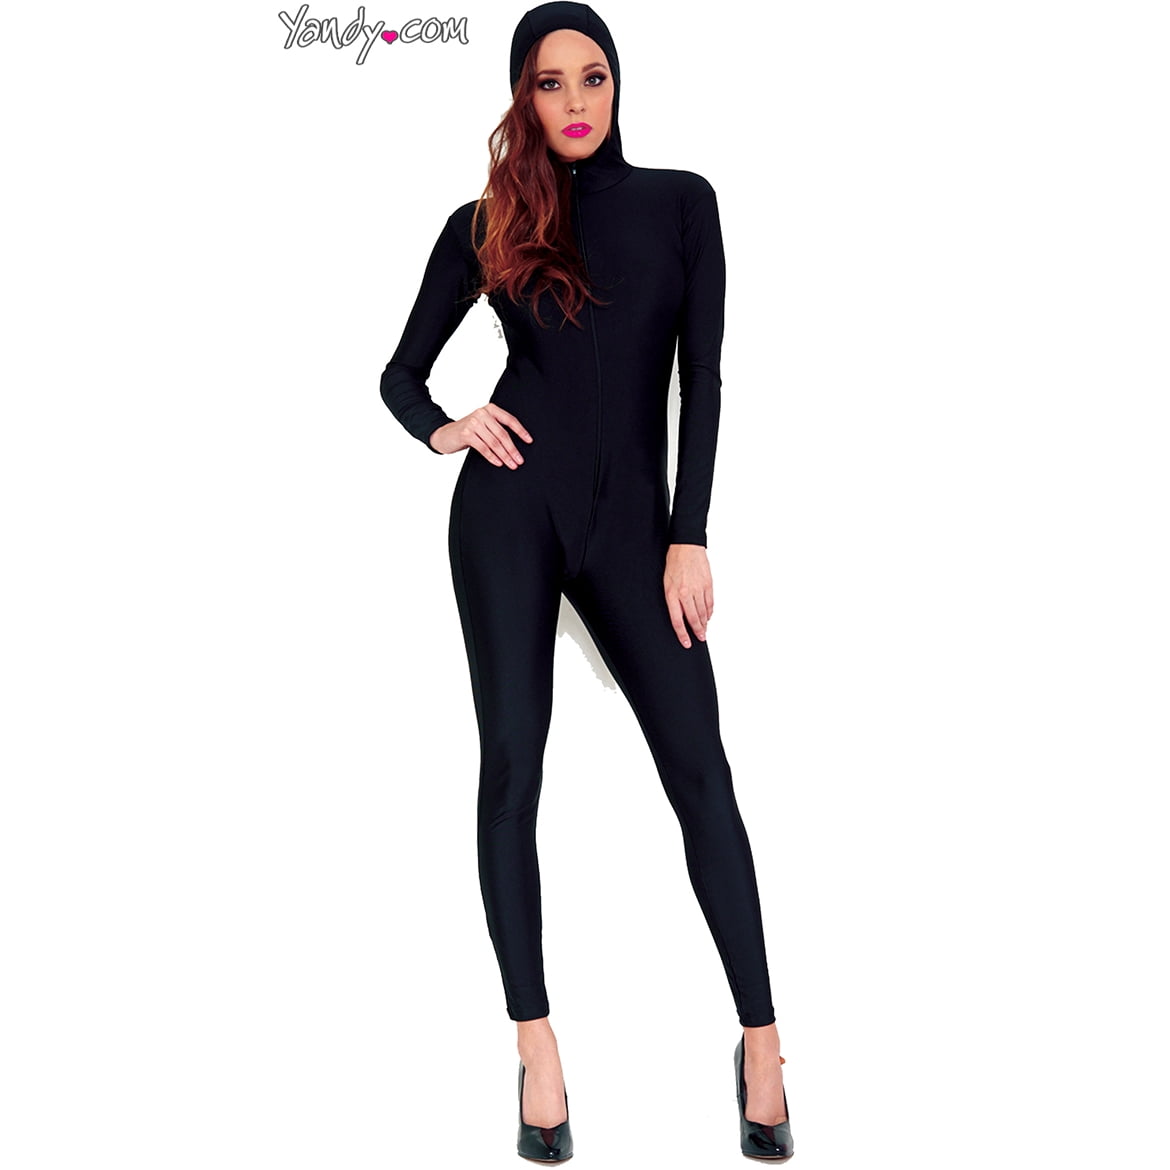 Full Bodysuit With Attached Hood - Walmart.com